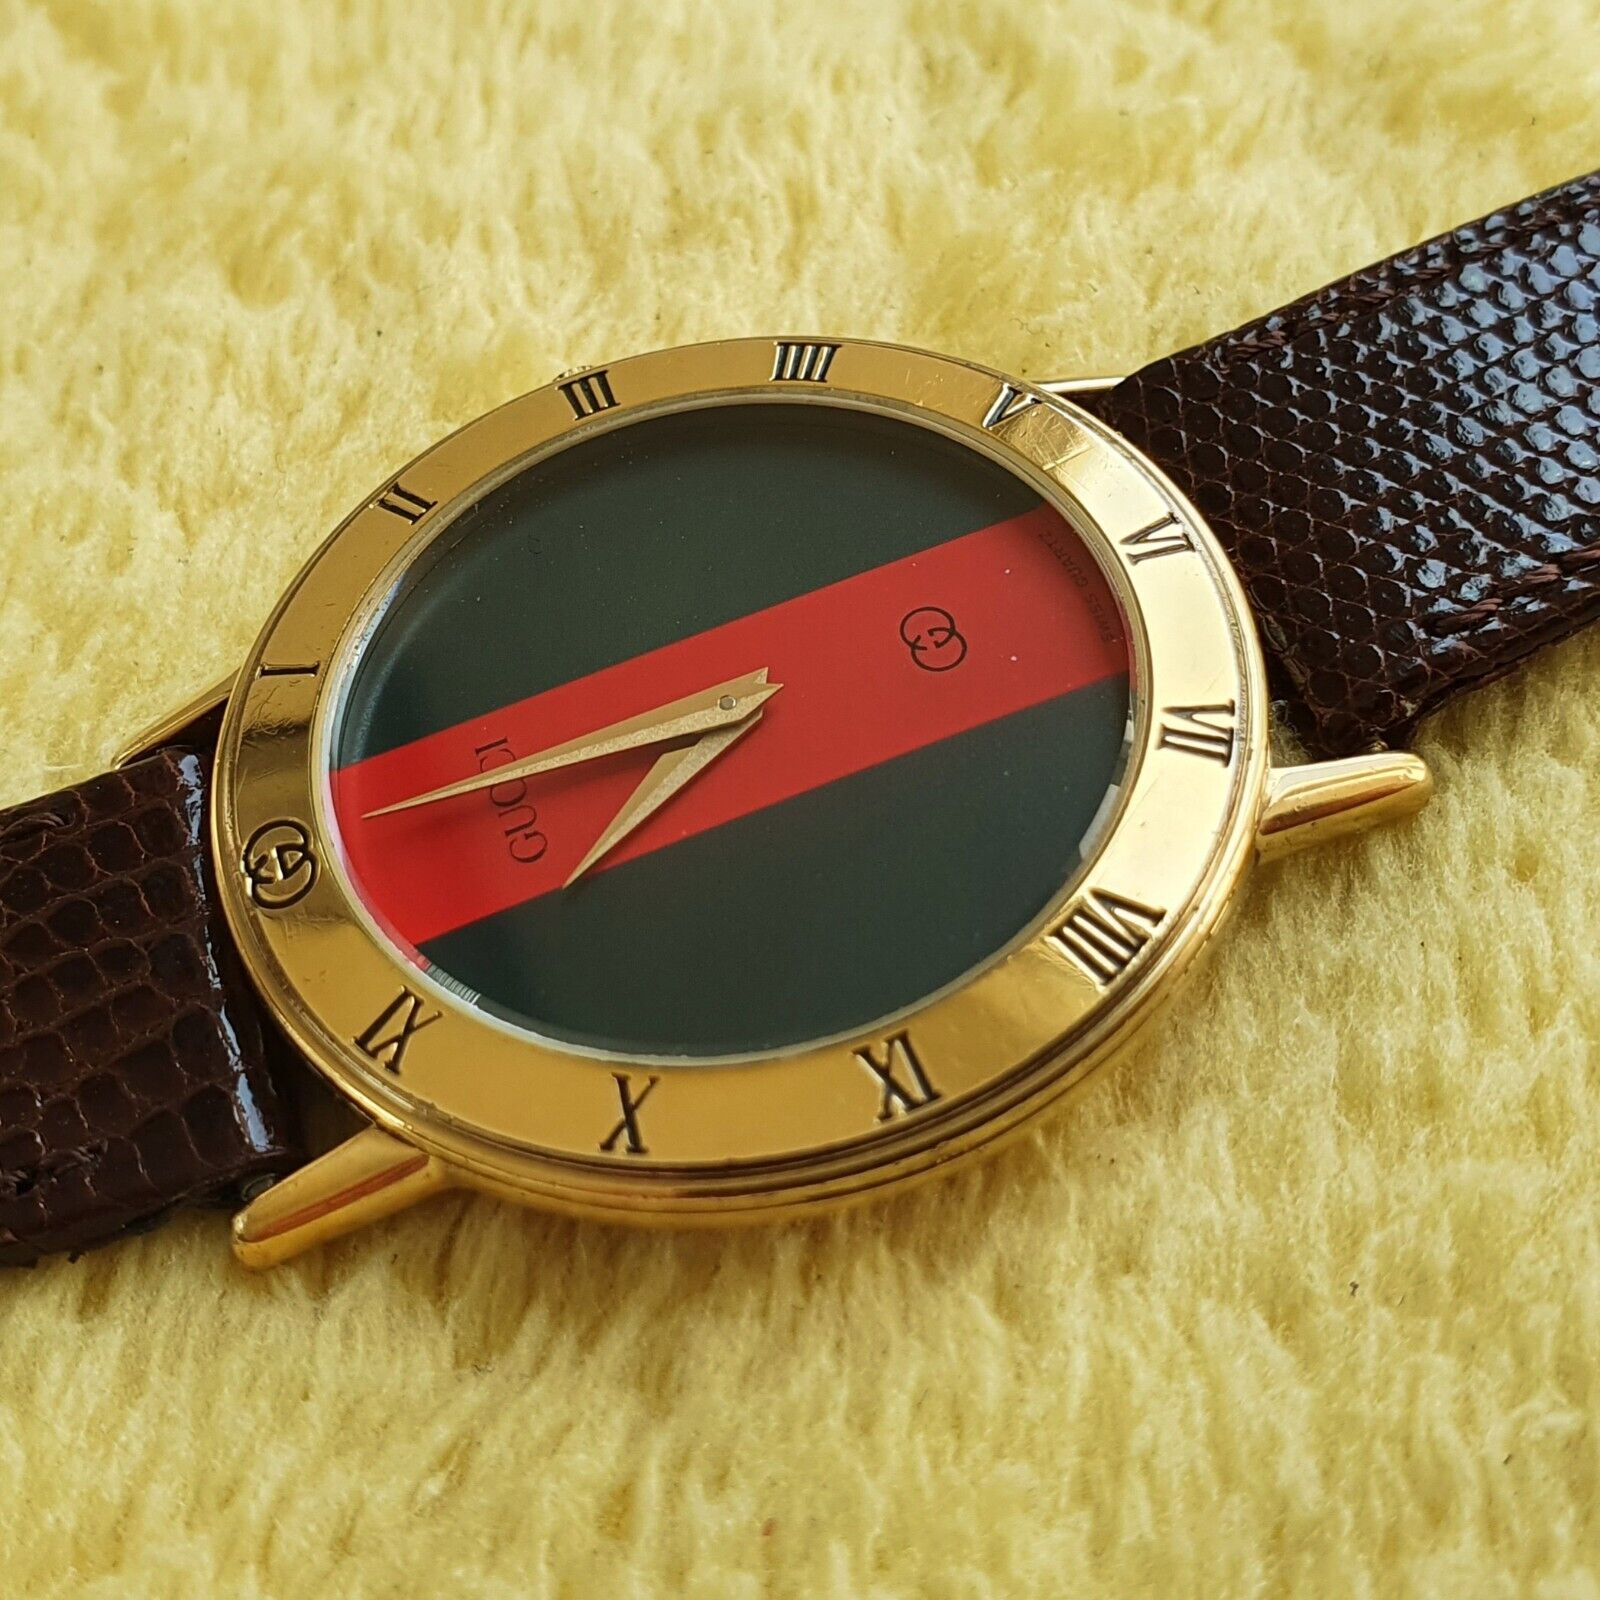 Gucci 3000M 18k Gold Plated Men's/Women's Watch with Red and Green